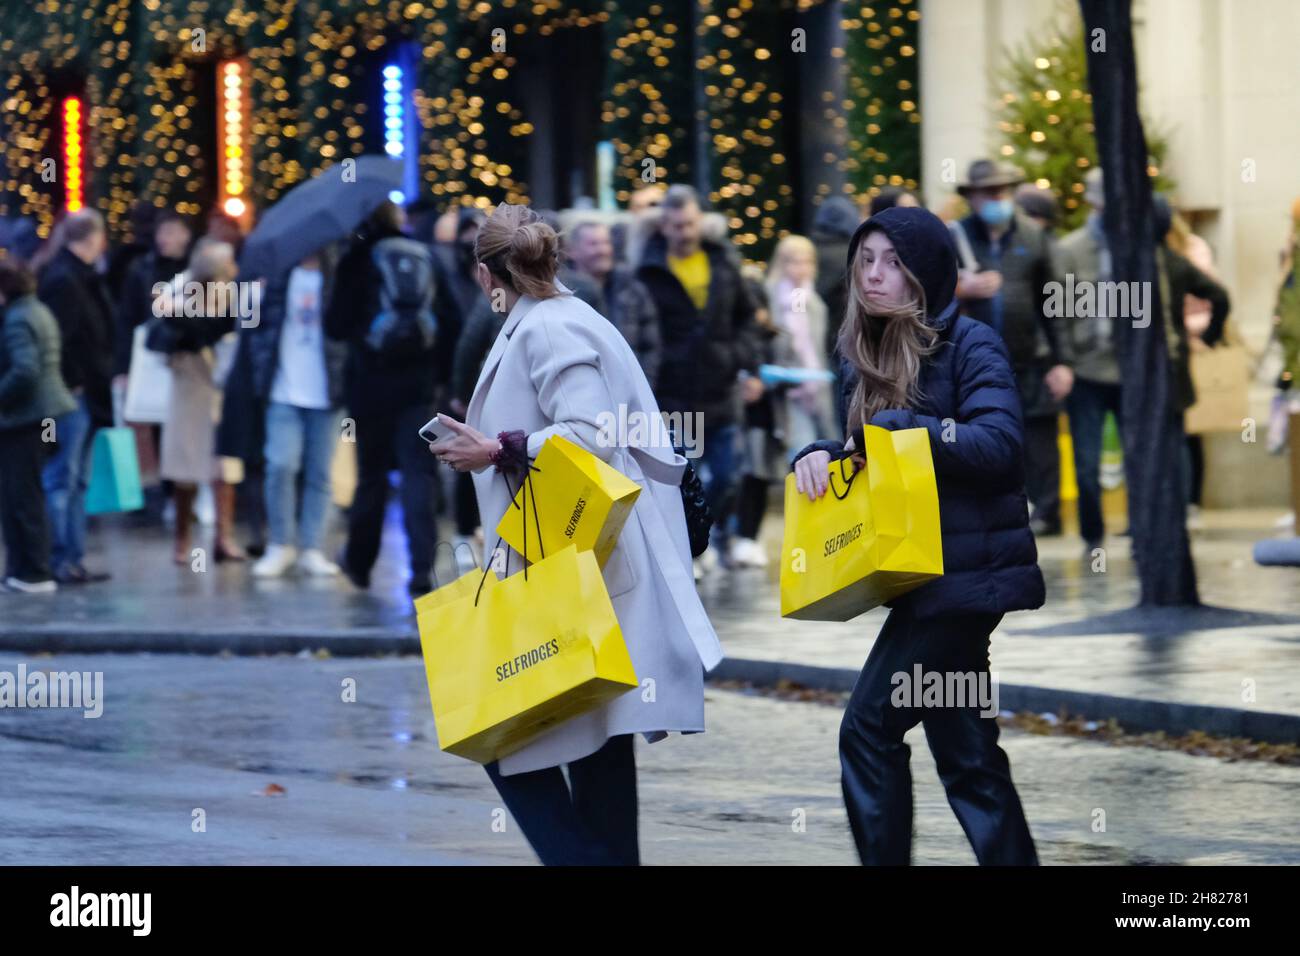 Oxford Street Shoppers High Resolution Stock Photography and Images - Alamy